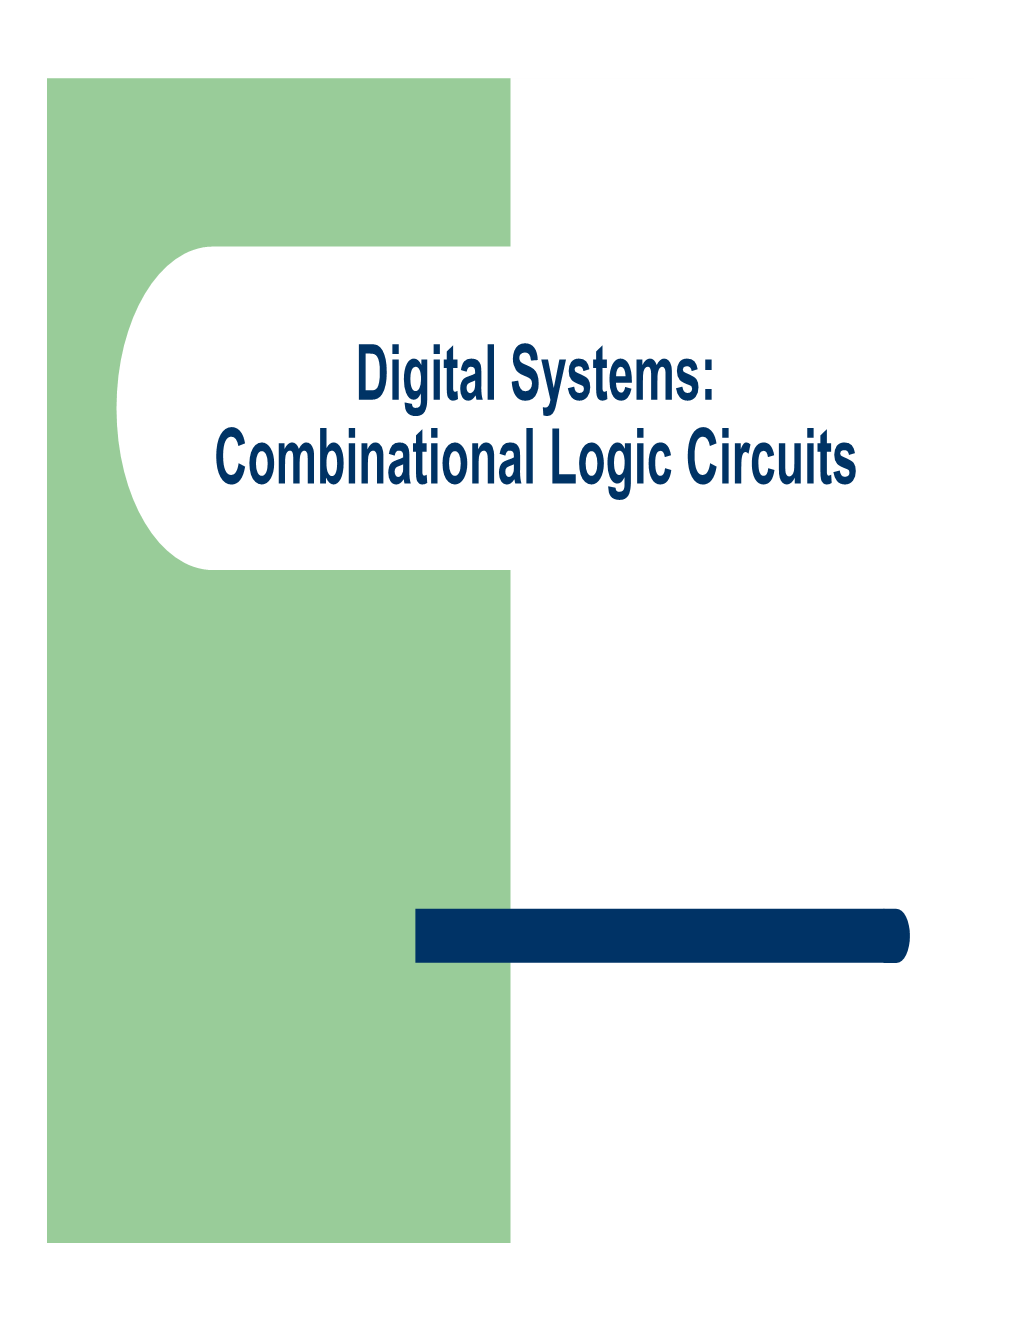 Digital Systems: Combinational Logic Circuits Objectives